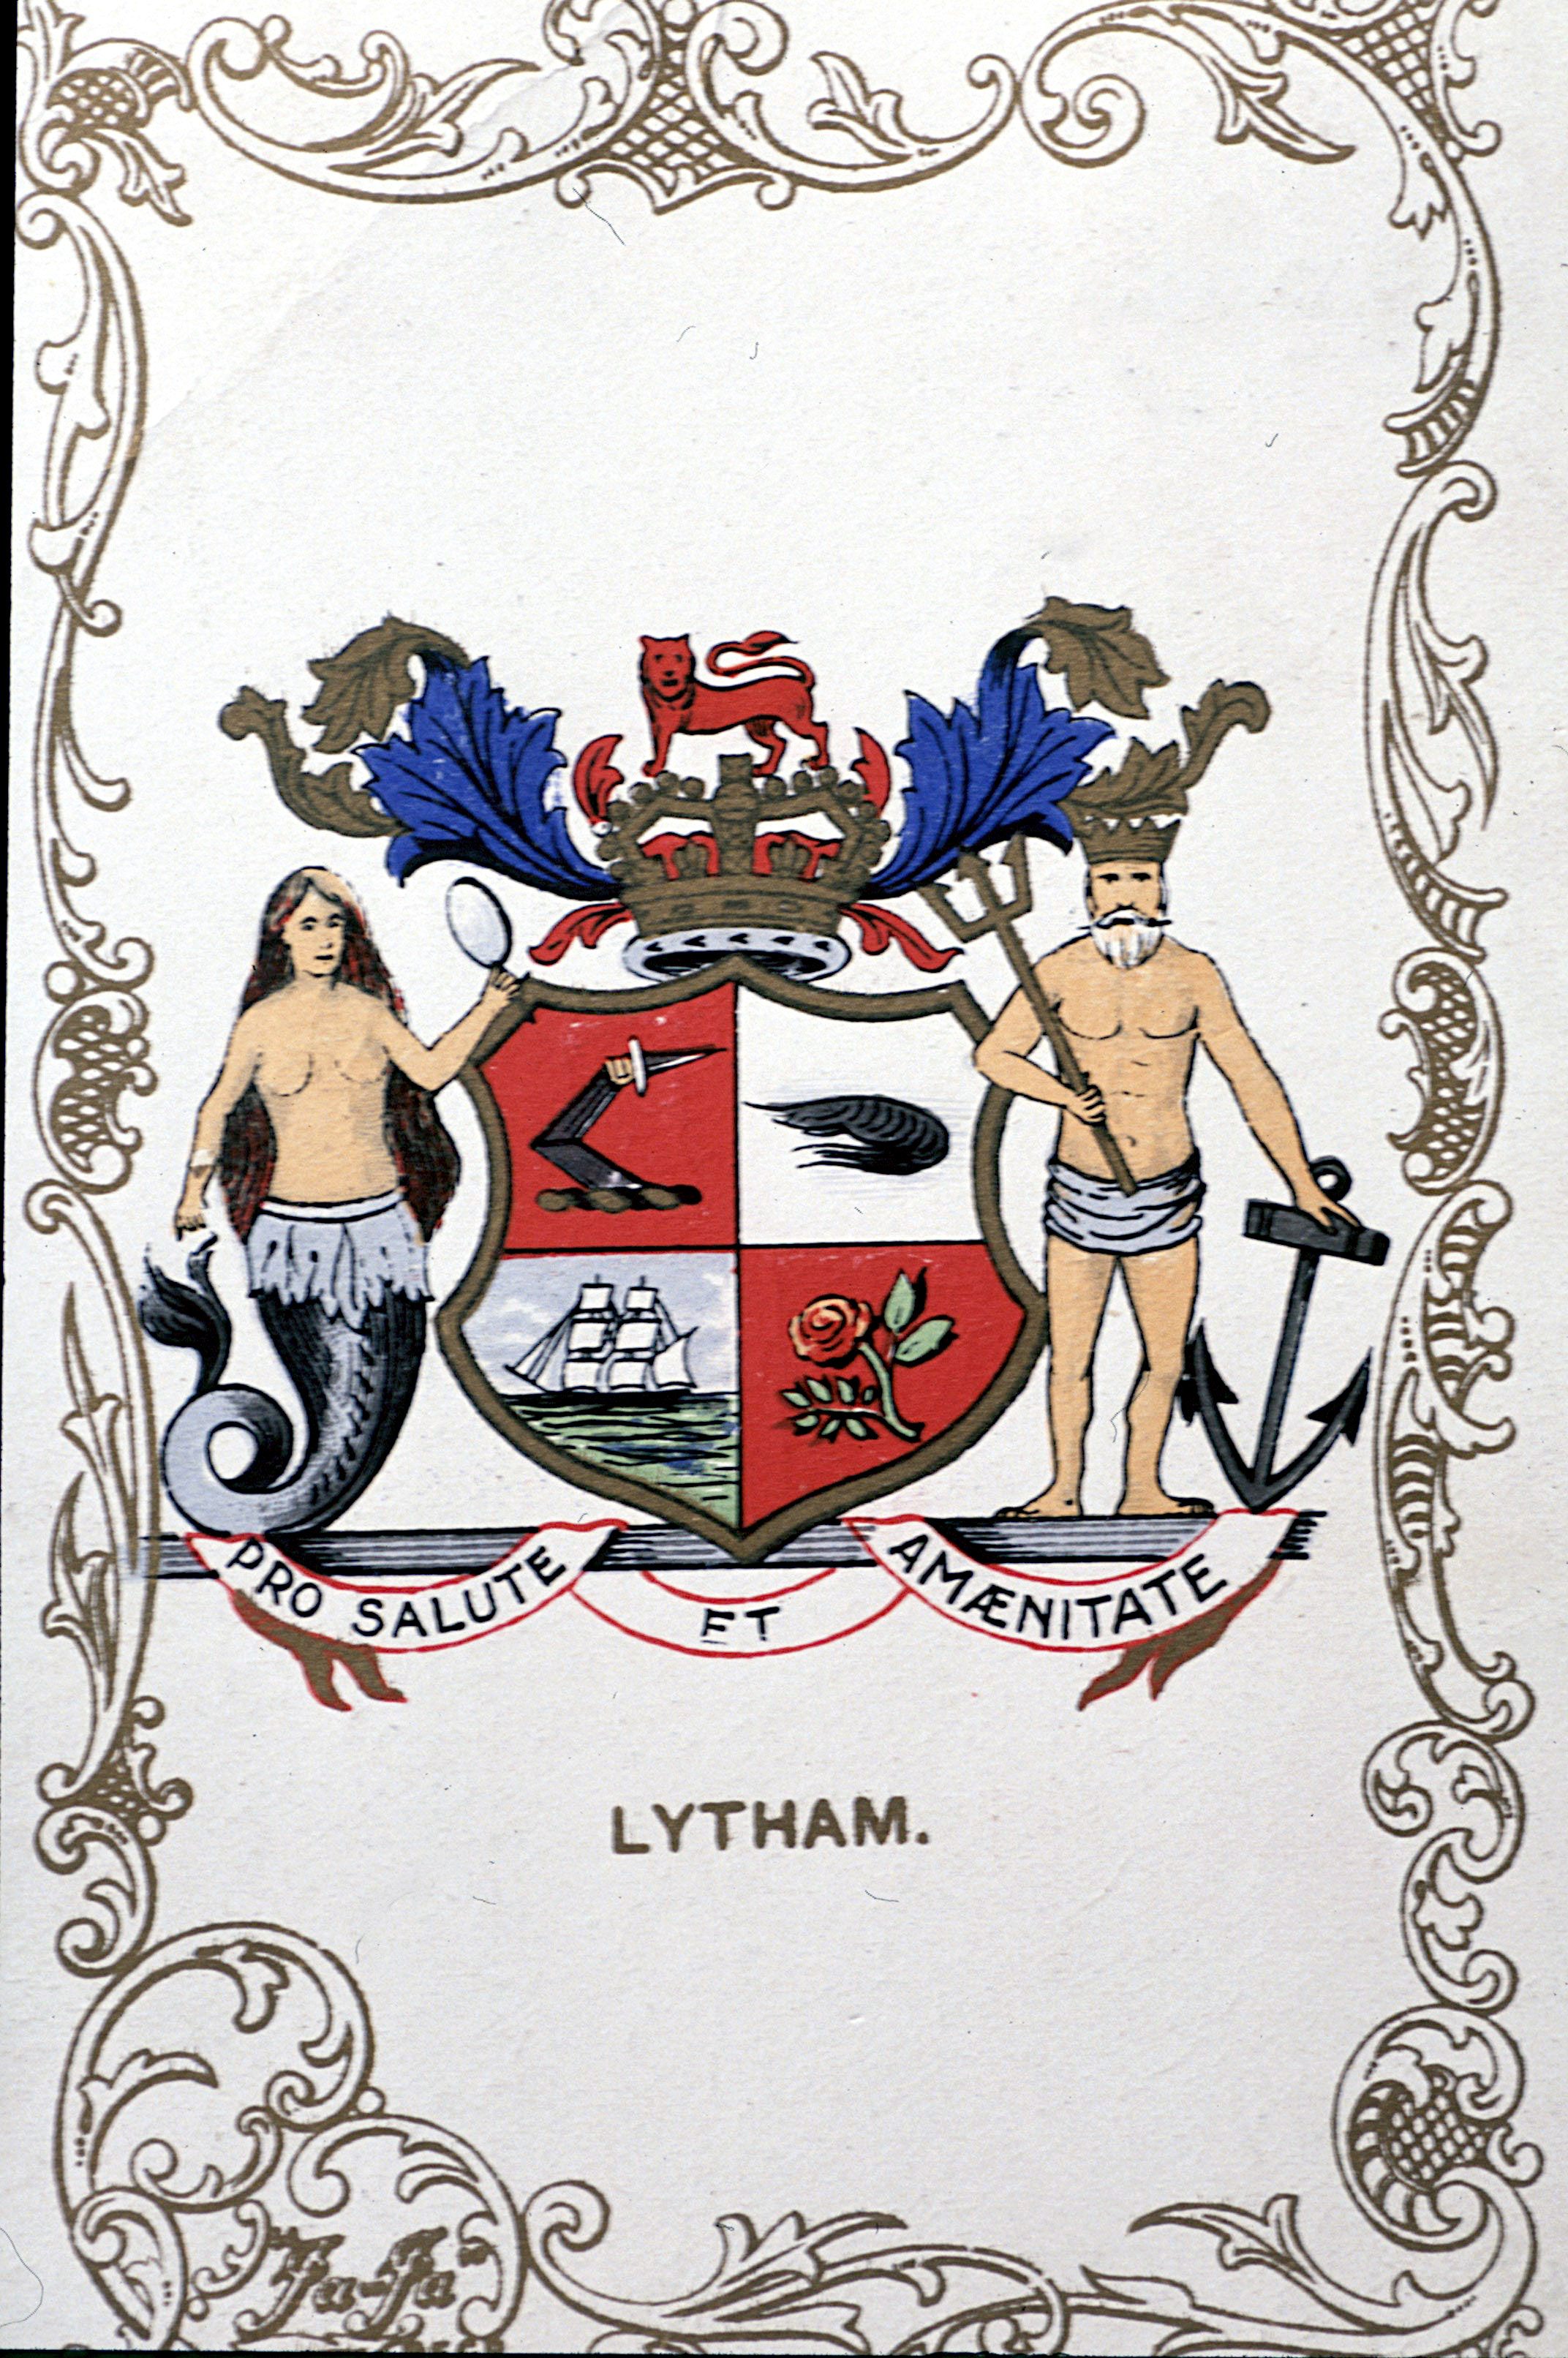 Lytham coat of arms